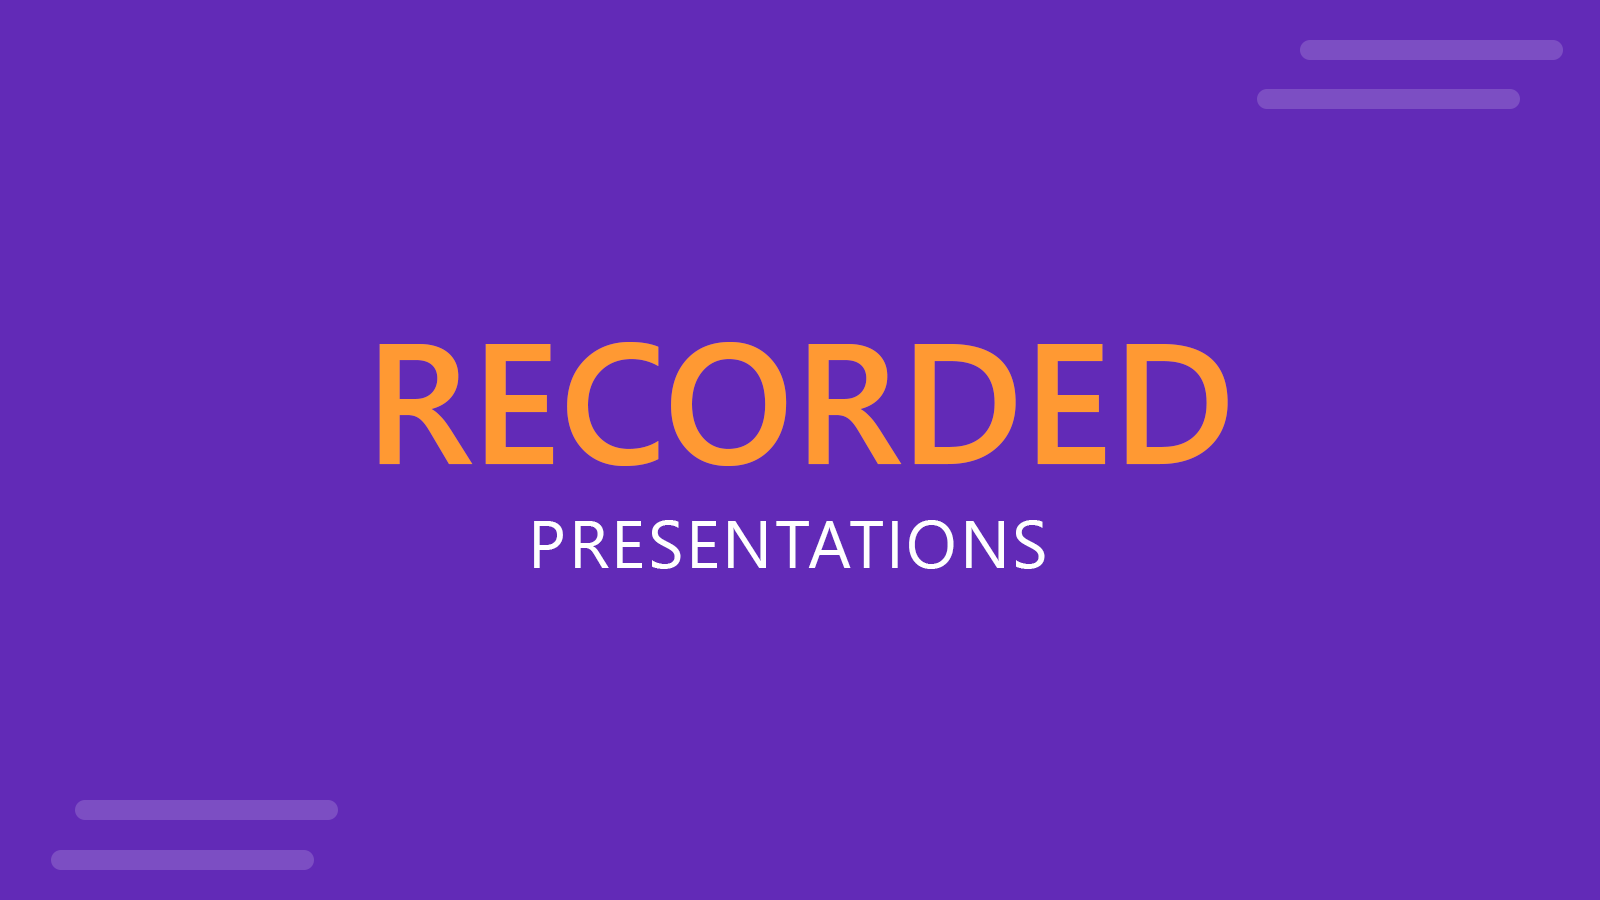 How To Record a PowerPoint Presentation